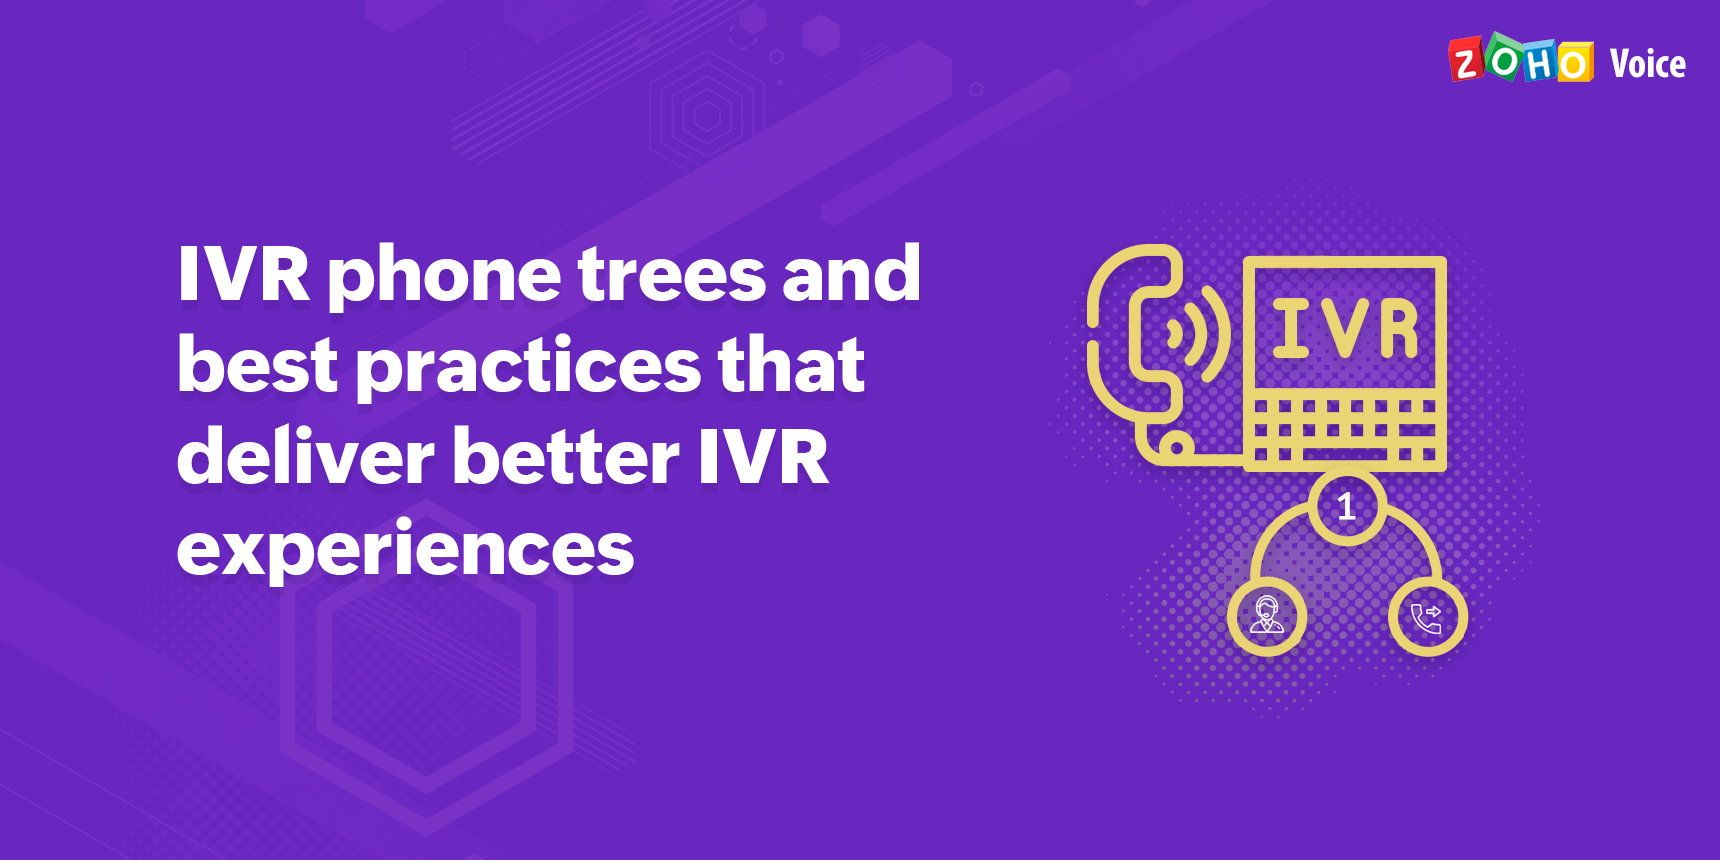 IVR phone trees create knockout customer service experience with Zoho Voice